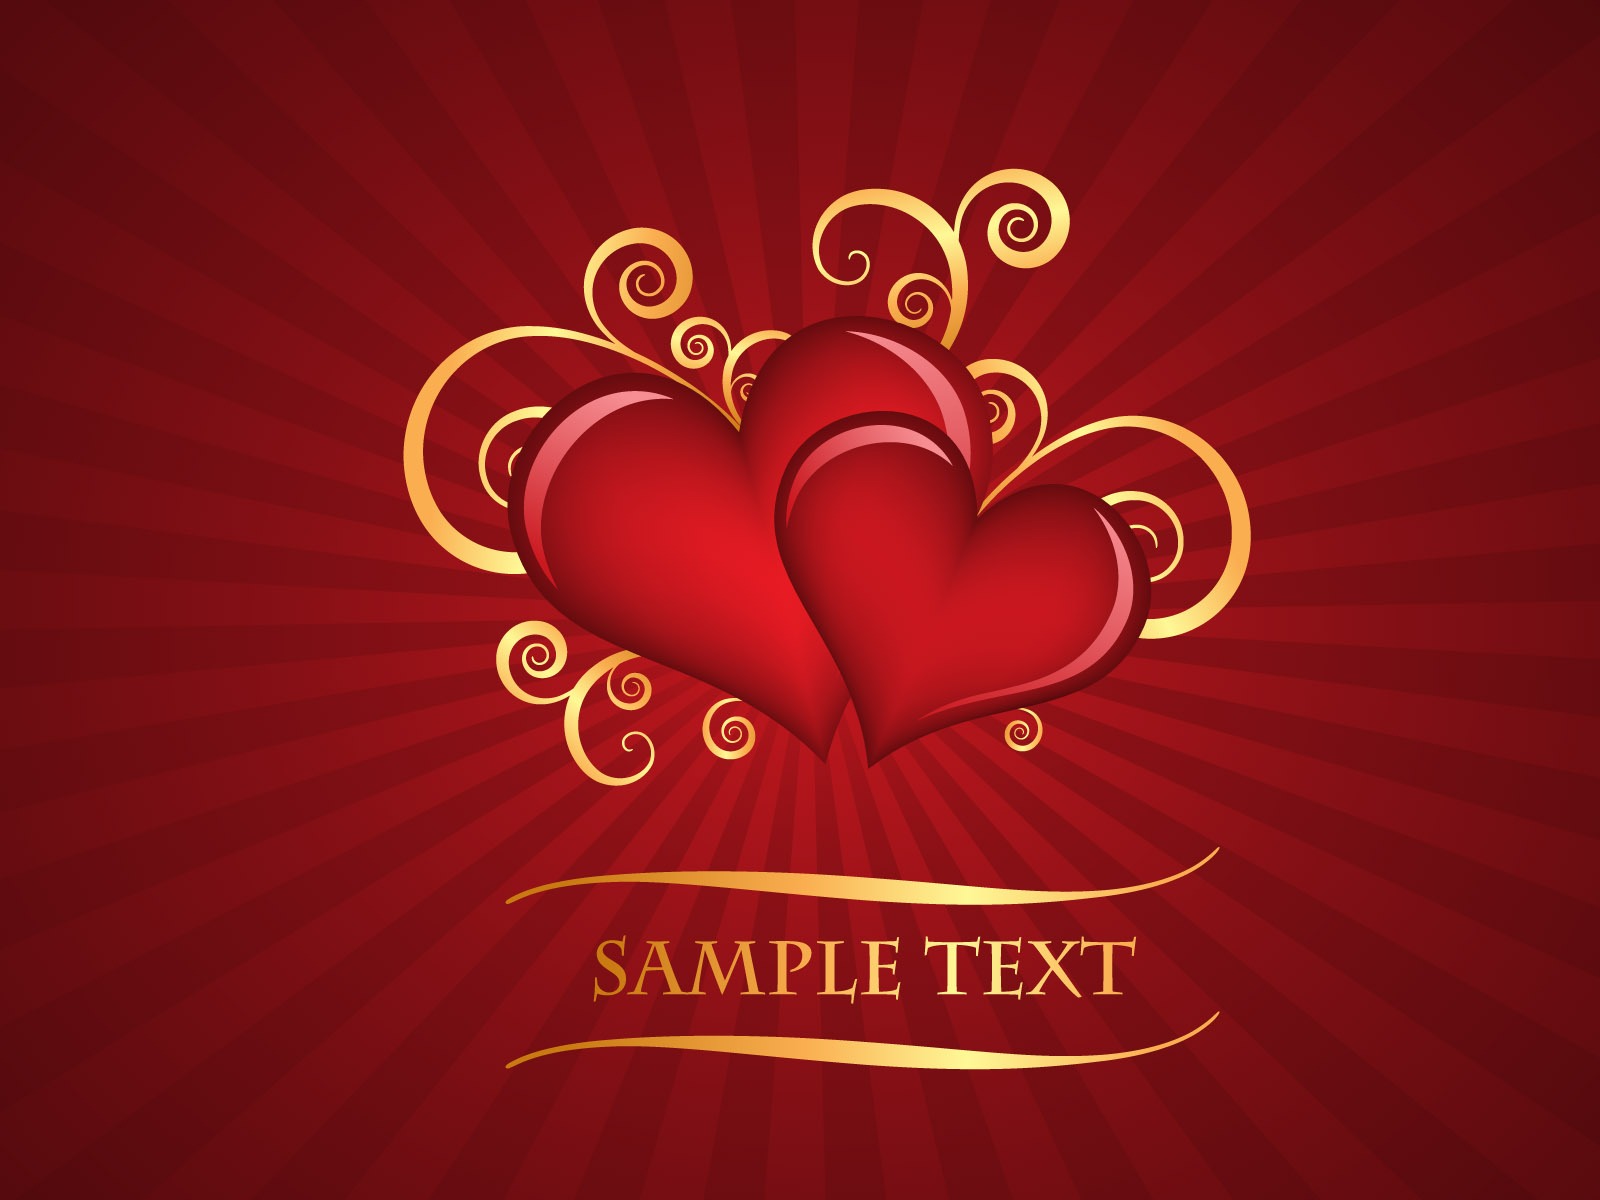 Valentine's Day Theme Wallpapers (6) #9 - 1600x1200